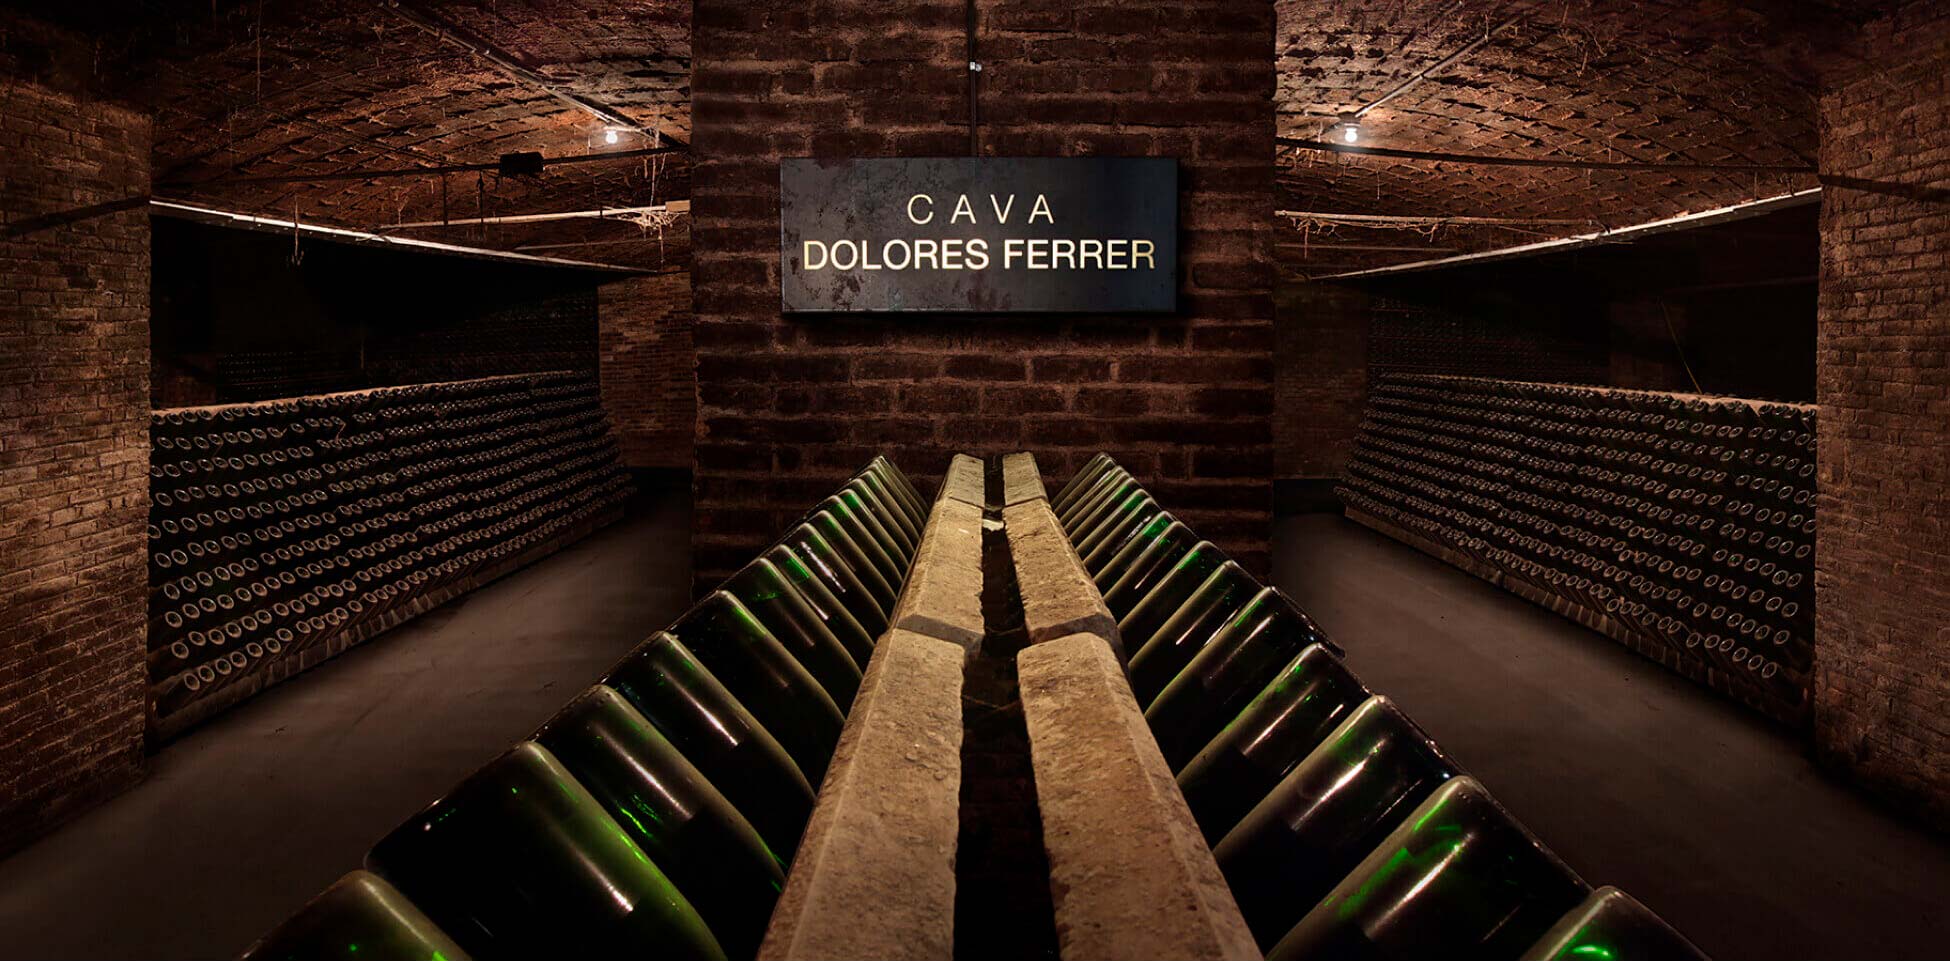 Well-illuminated cellar entry with sign that reads Cava Dolores Ferrer, with brick construction and racks of inverted and shelved wine. ç